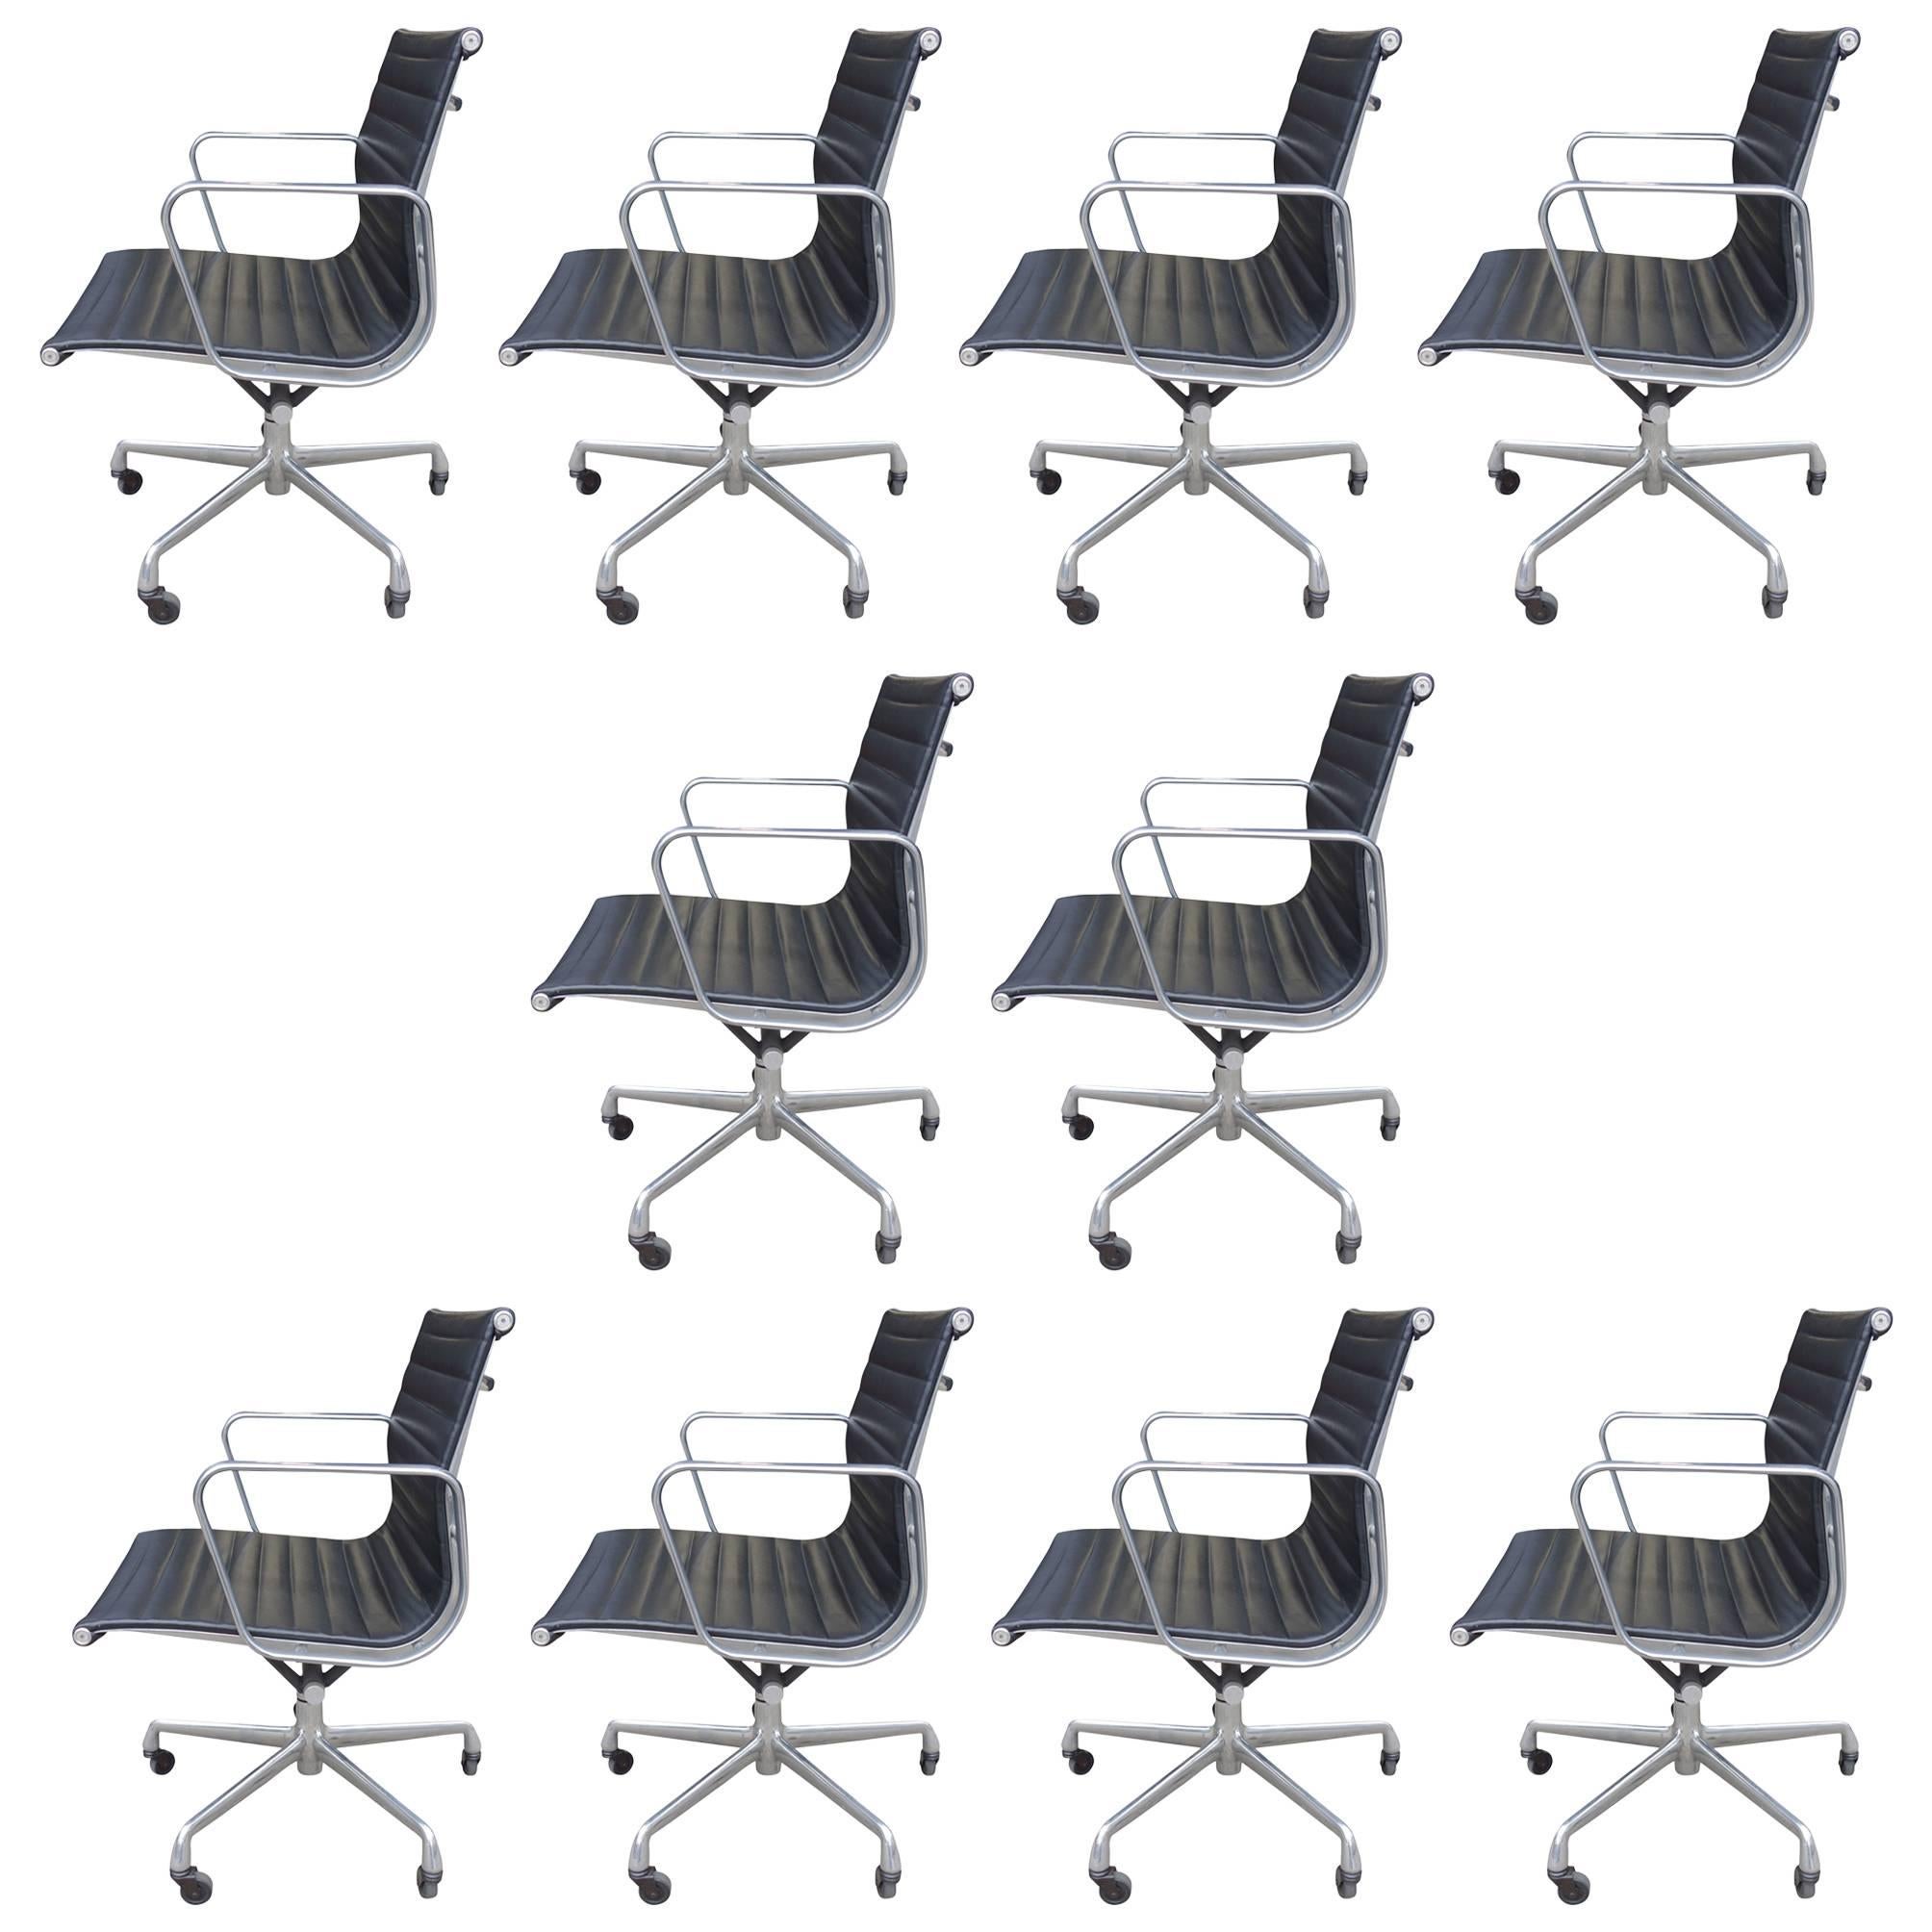 For your consideration are up to 6 aluminum group chairs in black leather designed by Eames for Herman Miller. All in good original condition showing expected wear consistent with age and use. With tilt and height adjustment.